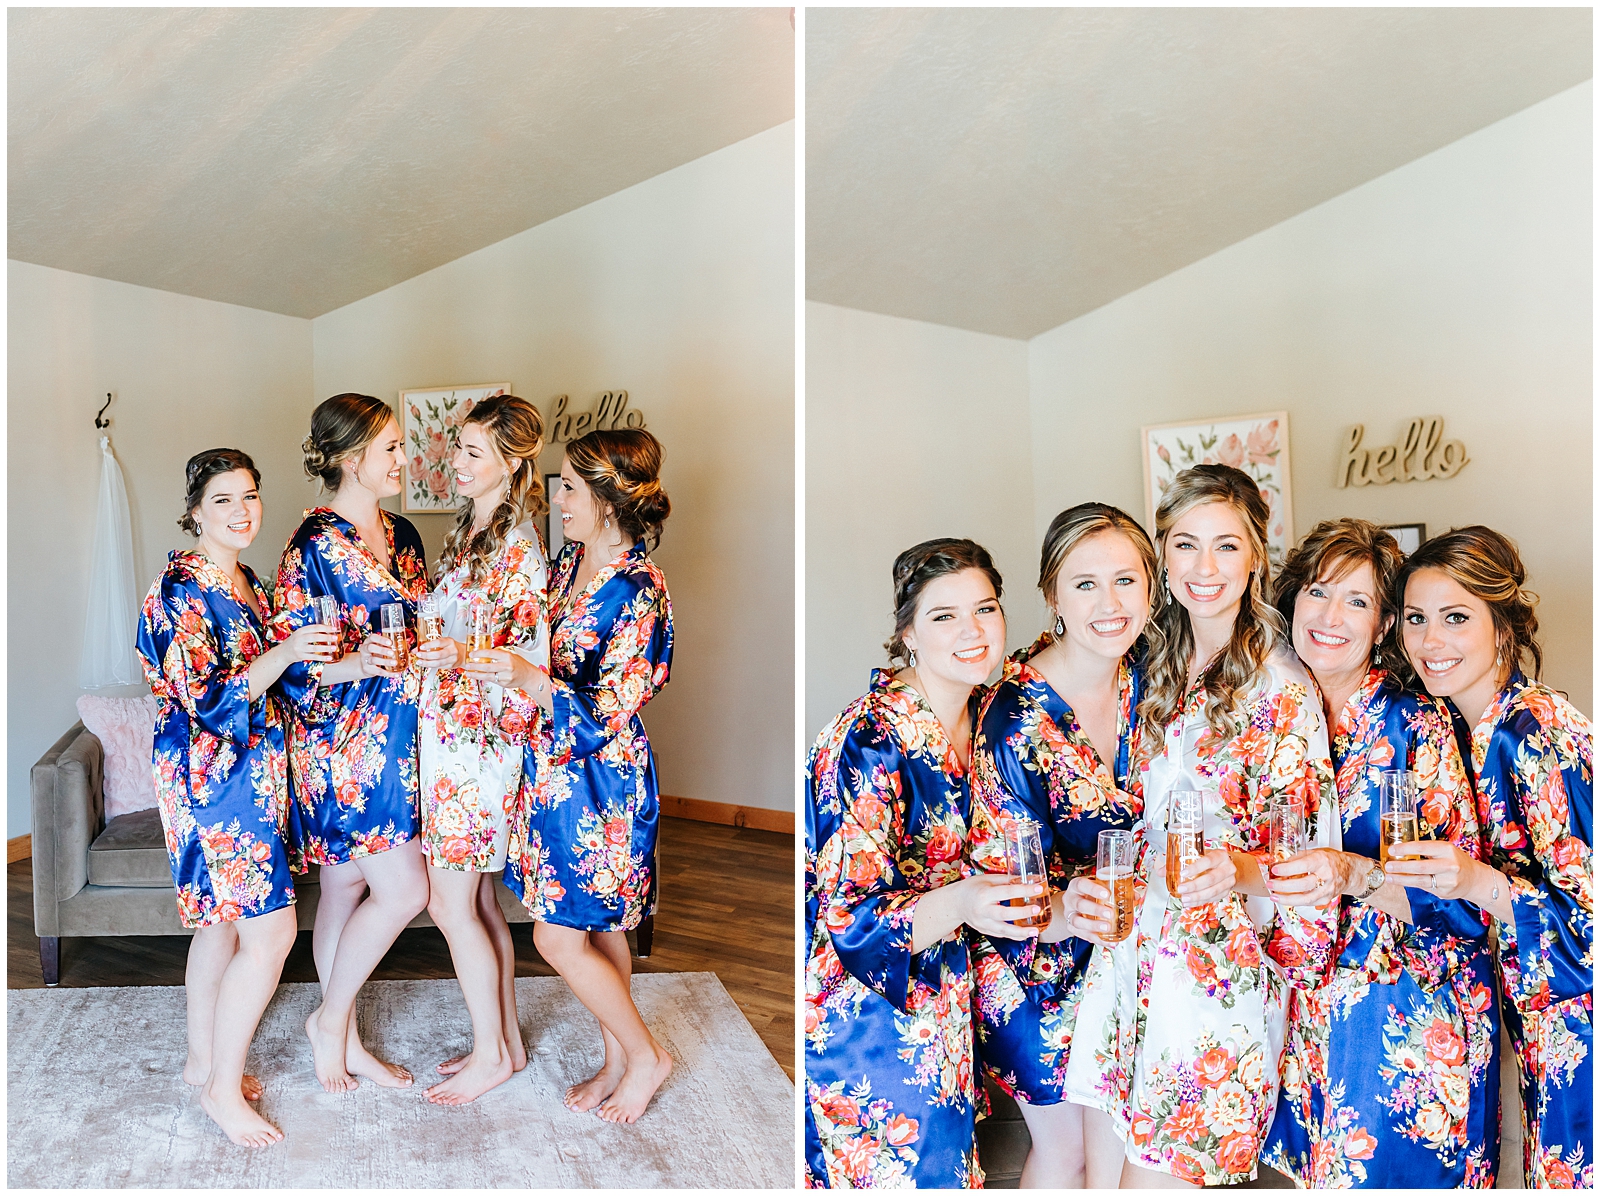 Bridesmaids Getting Ready in Floral Robes with Champagne